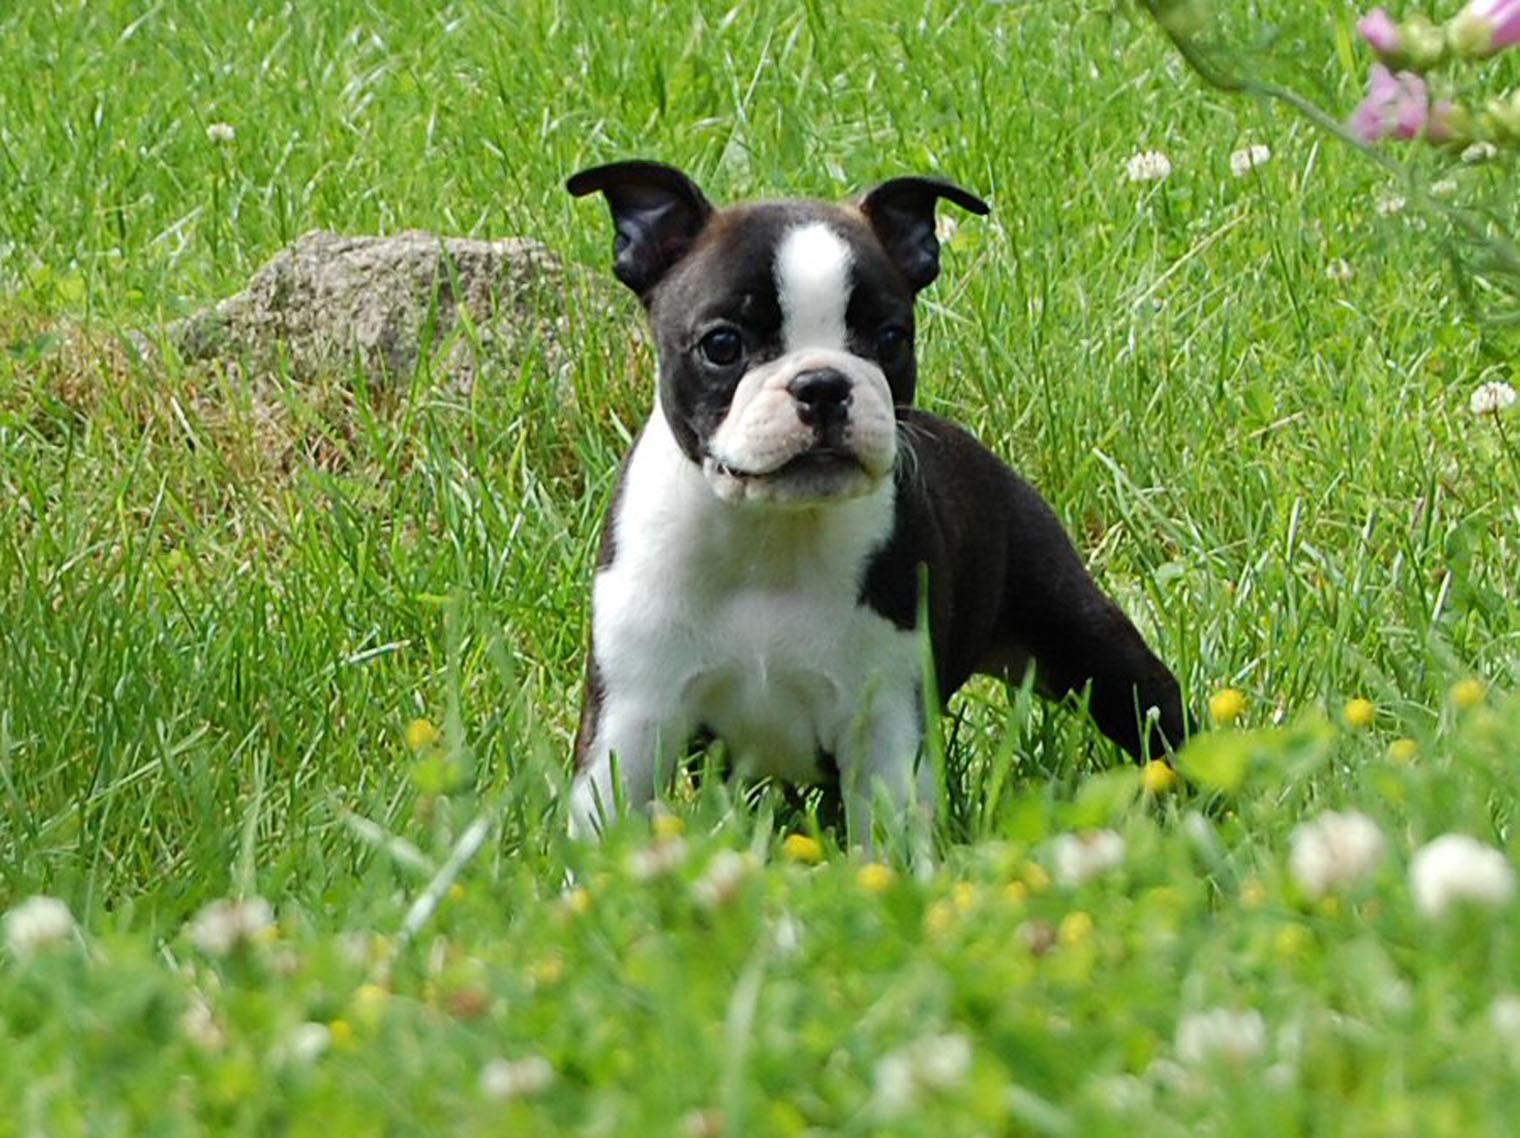 Boston Terrier on the meadow photo and wallpaper. Beautiful Boston